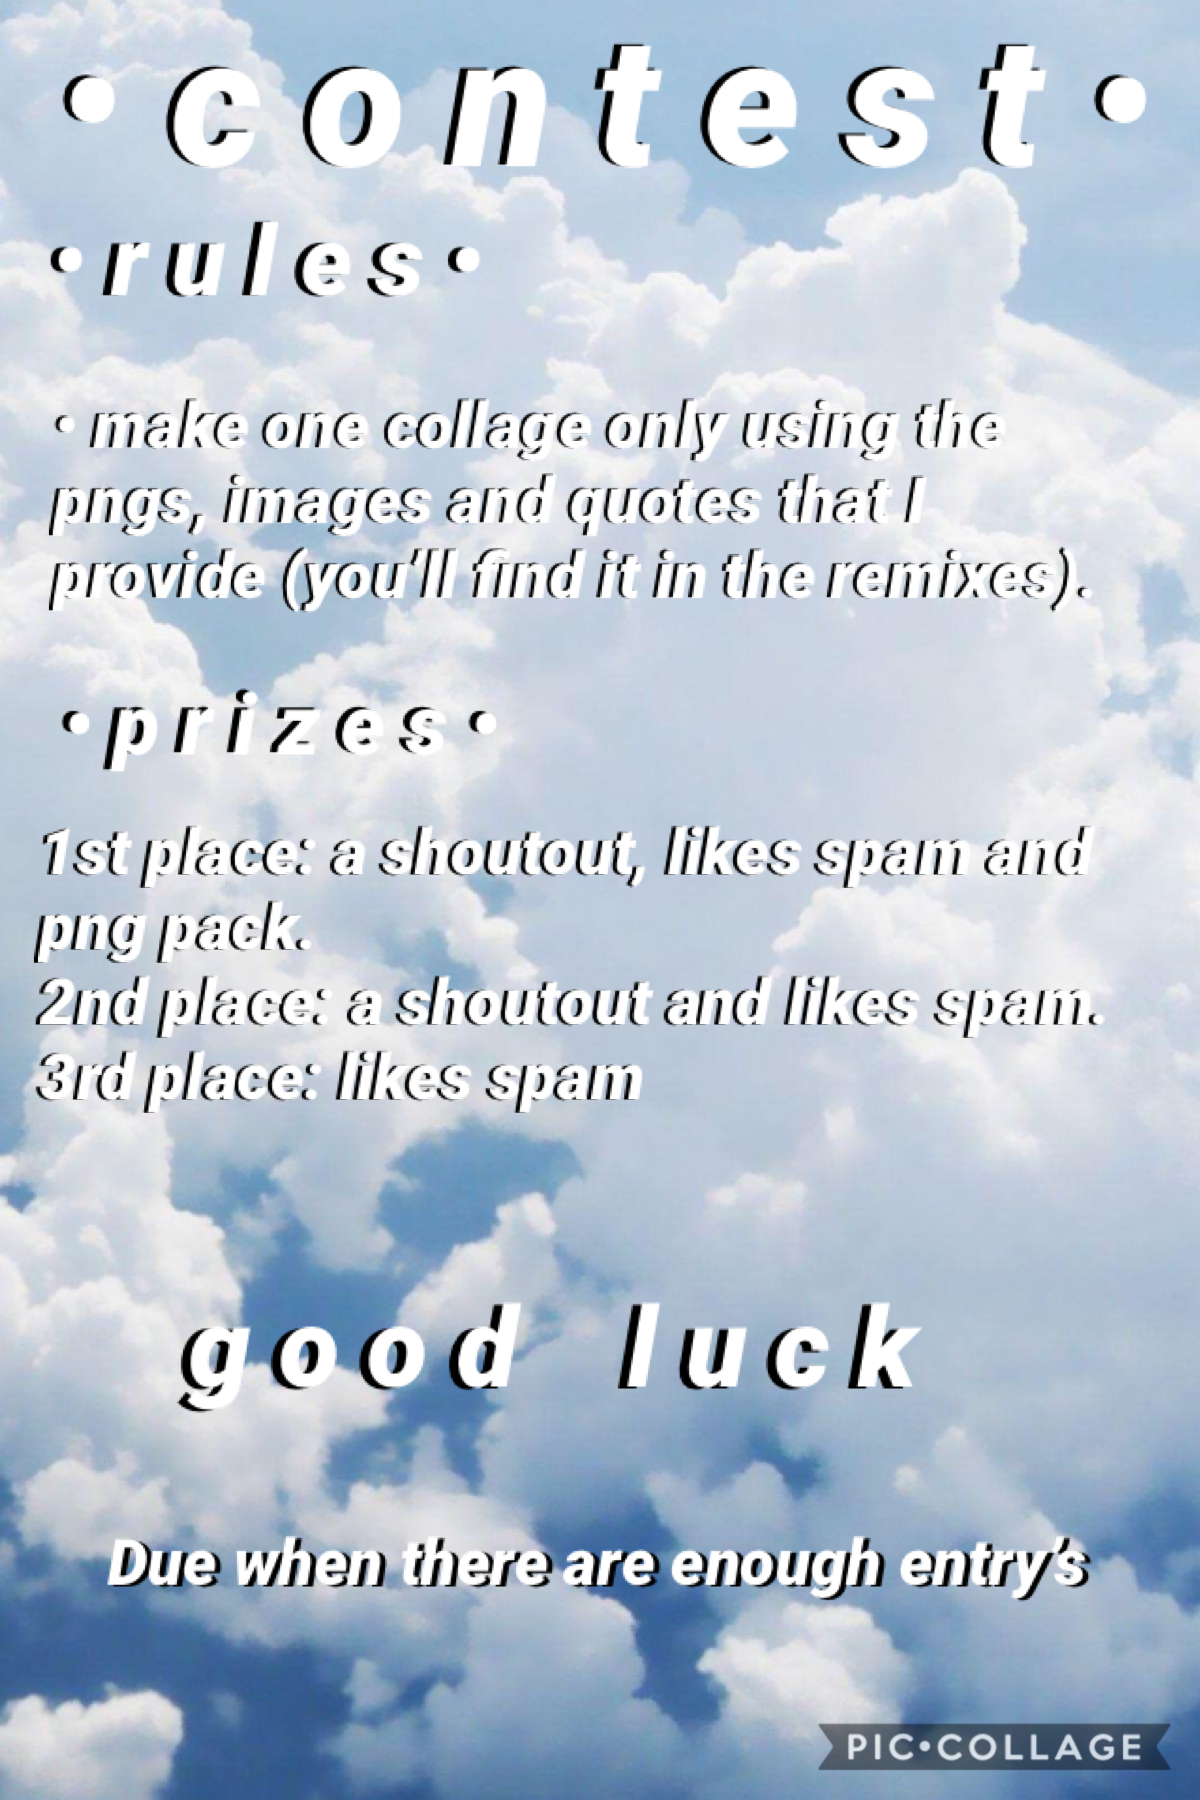 Good luck let me know your questions! 